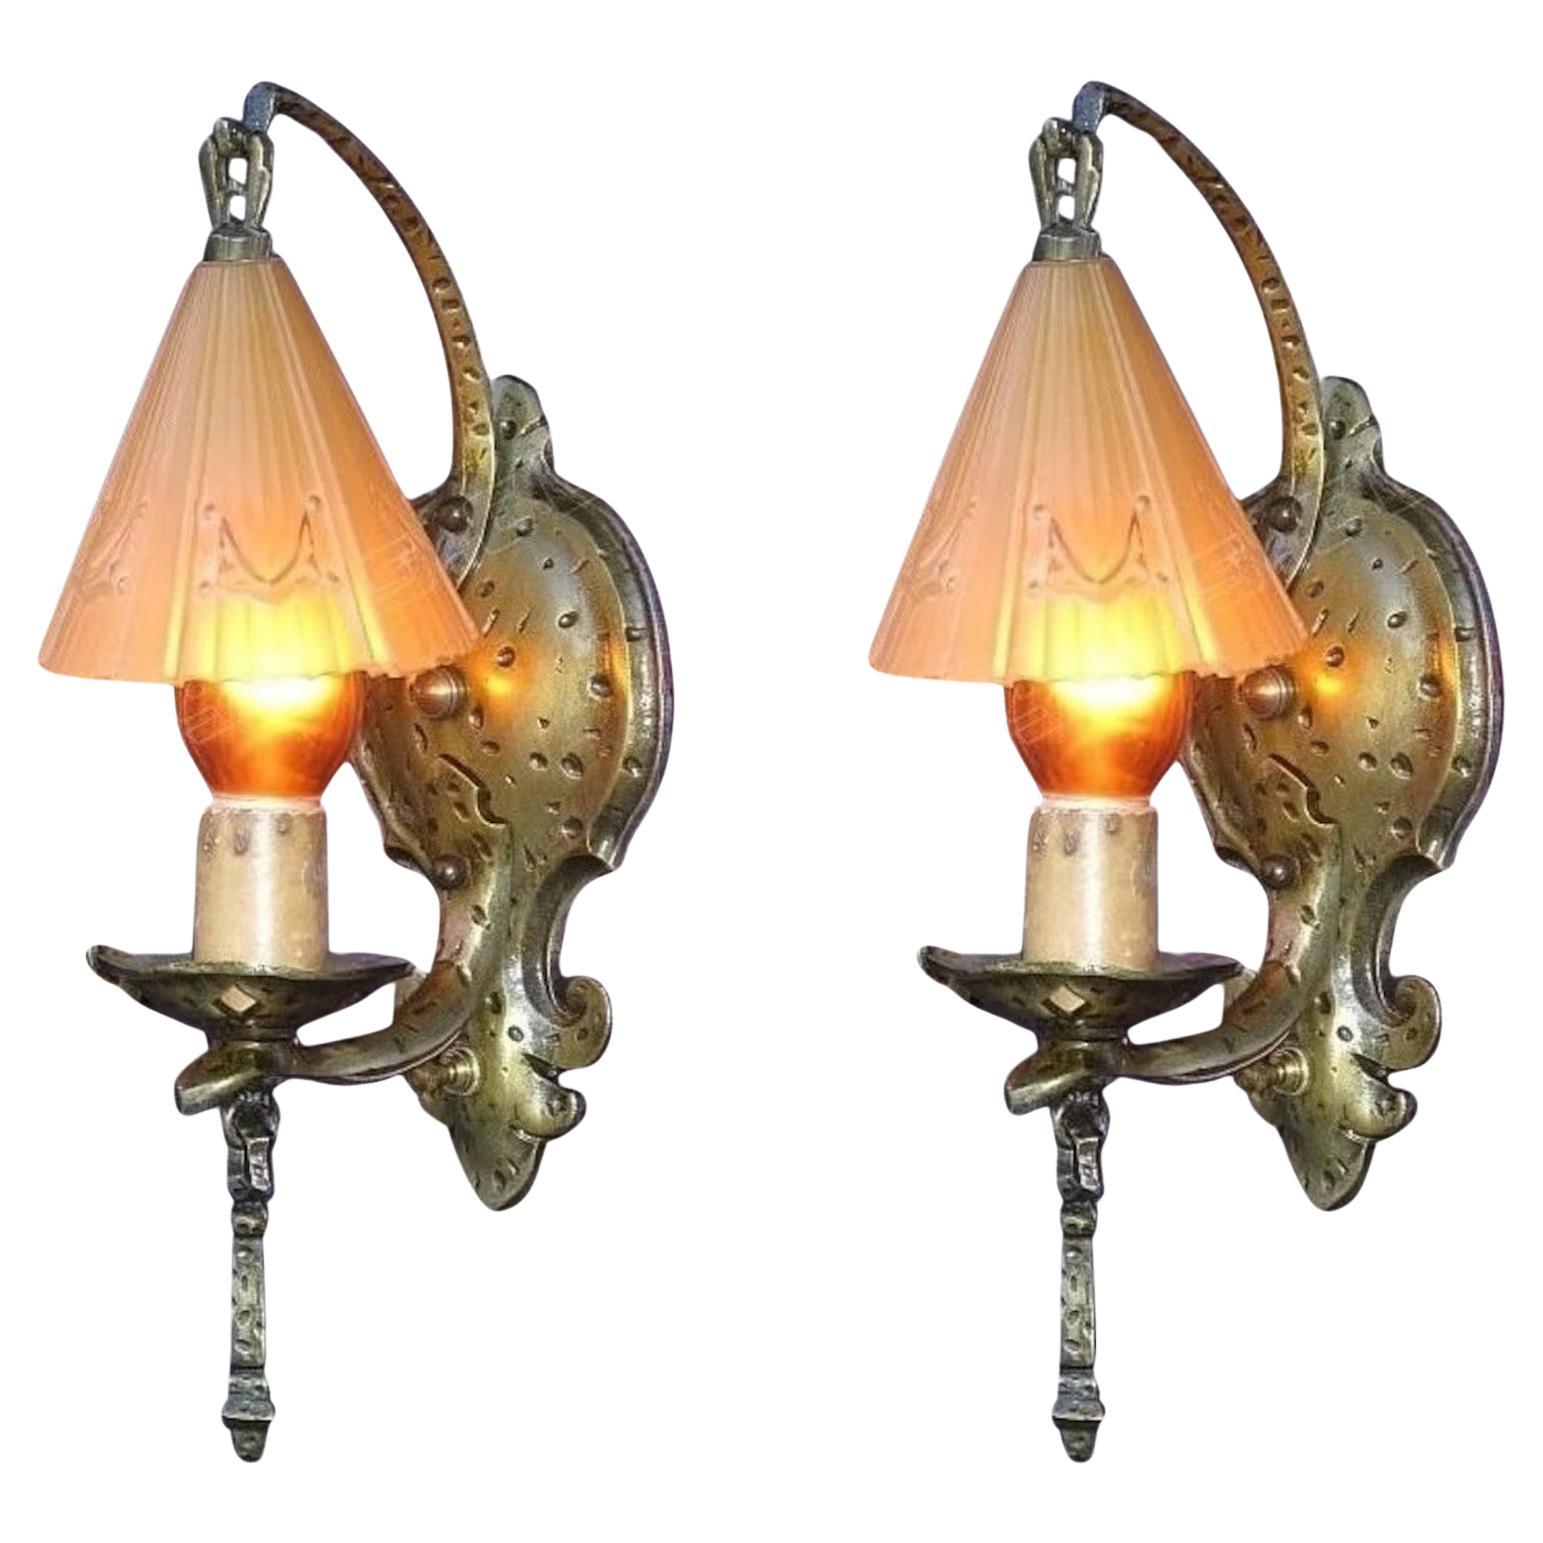 Vintage Storybook Wall Sconces 1930s priced per pair with 3 pr avaiable For Sale